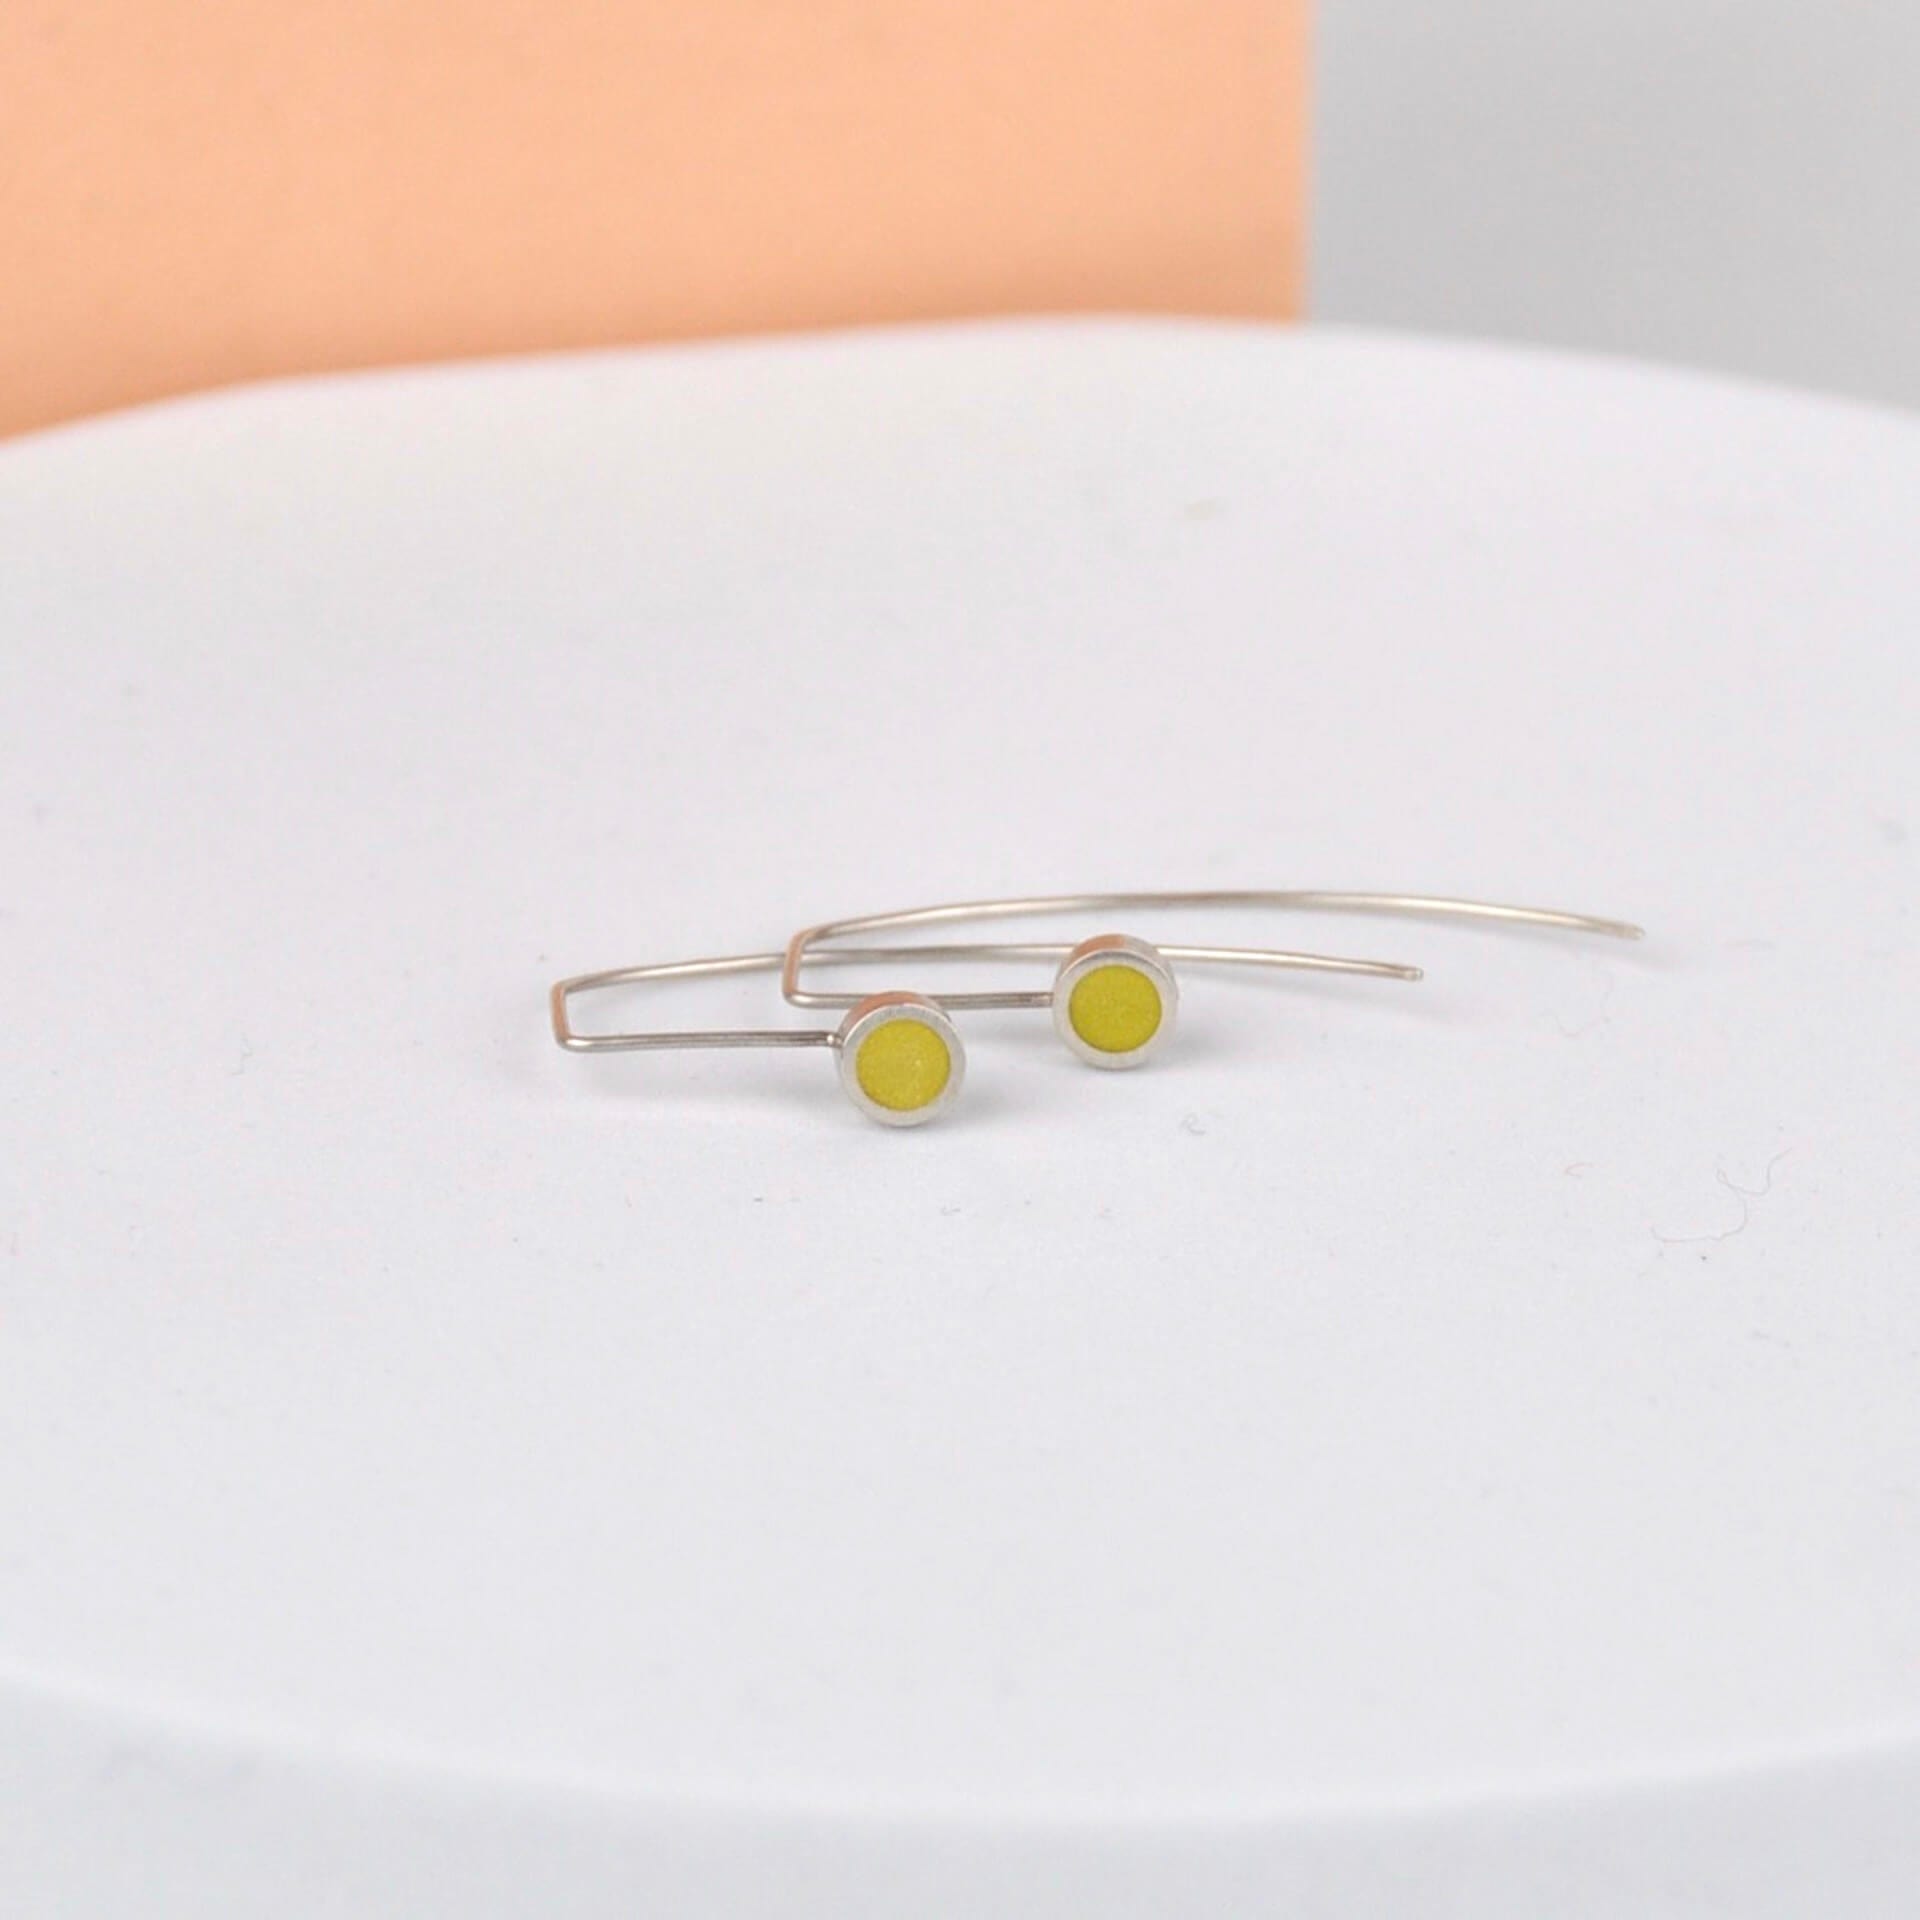 Clare Lloyd Earrings Yellow Contemporary Round Wire Earrings (various colours)